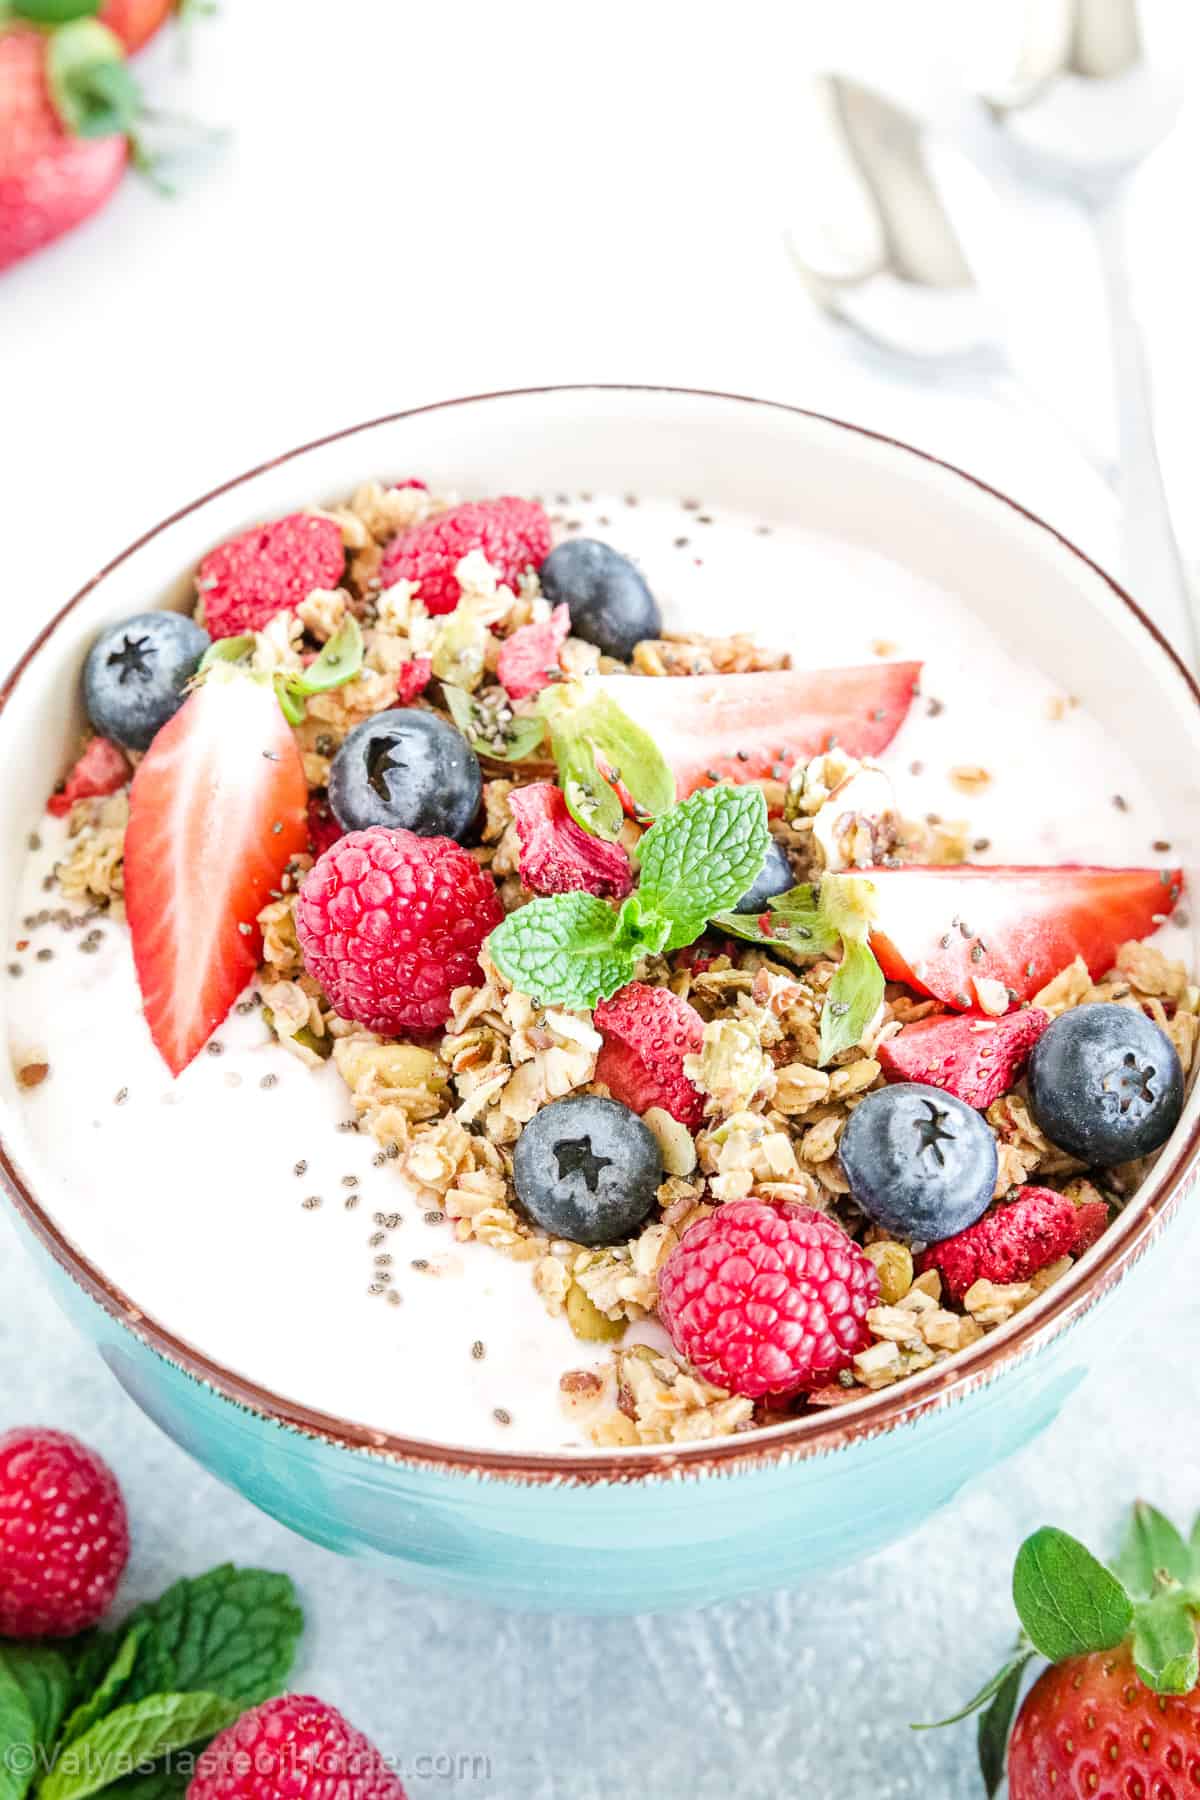 This Yogurt with Granola recipe will give you a tasty, nutritious breakfast that's packed with protein, vitamins, and minerals for an unforgettable treat!